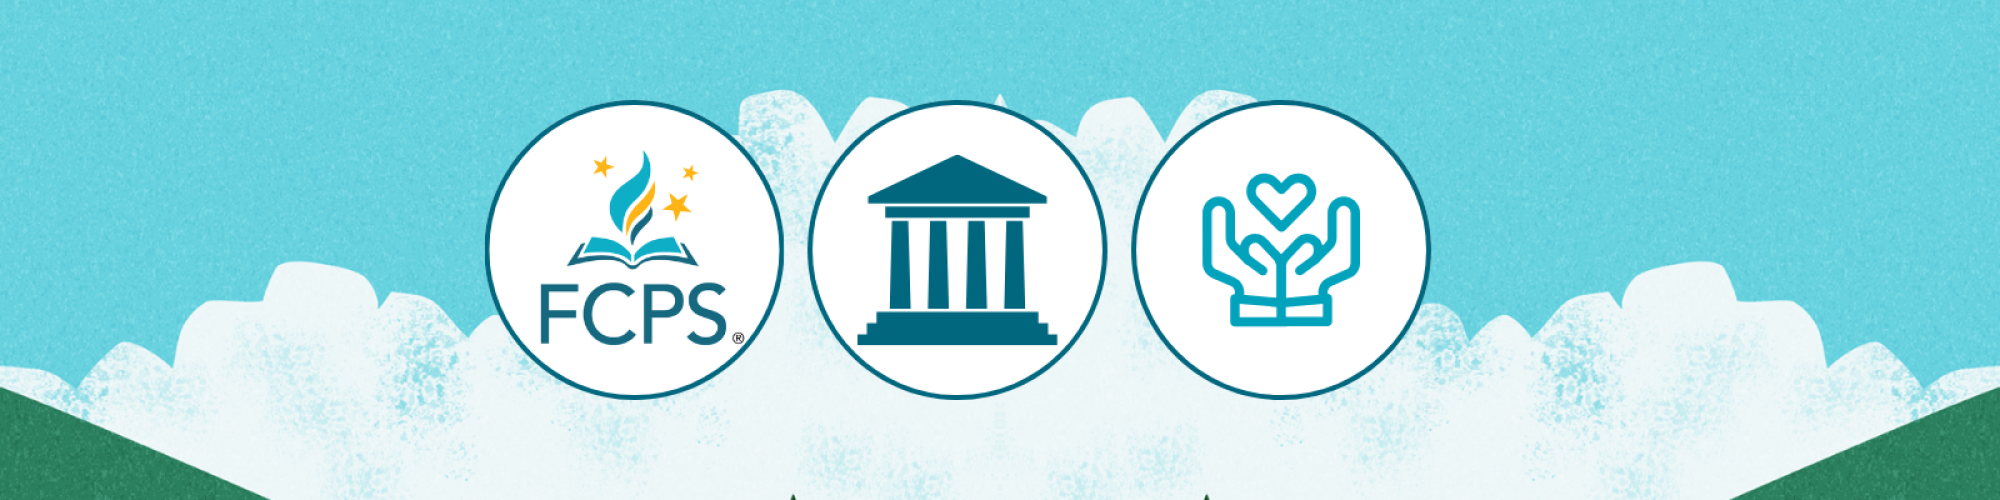 Illustration of a landscape with 3 icons: FCPS logo, government icon, and non-profit icon.